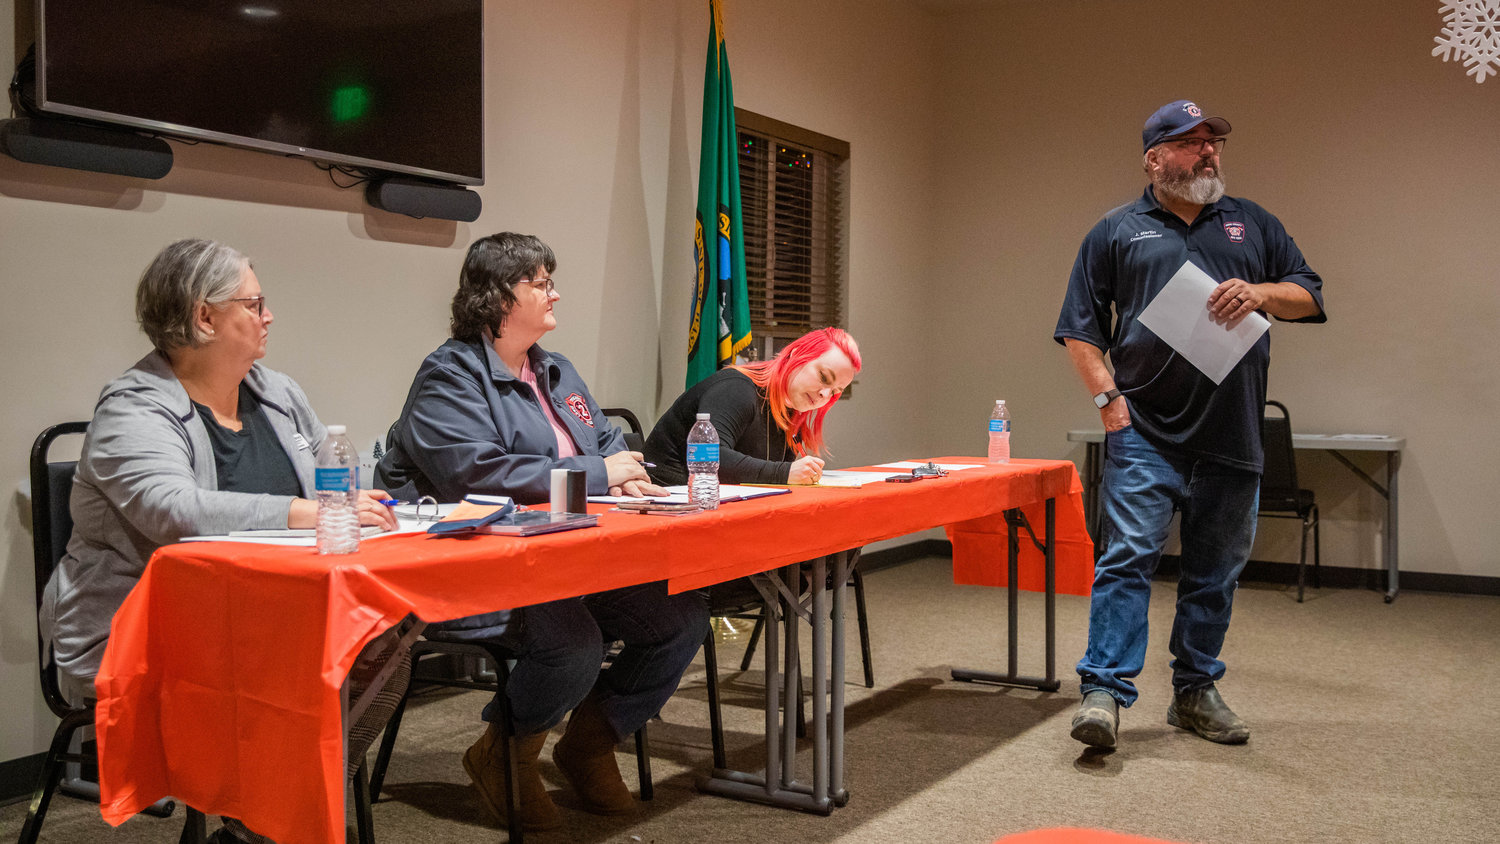 Officers were voted unanimously into their respective positions Monday night at the Lewis County Fire District 3 building in Mossyrock.